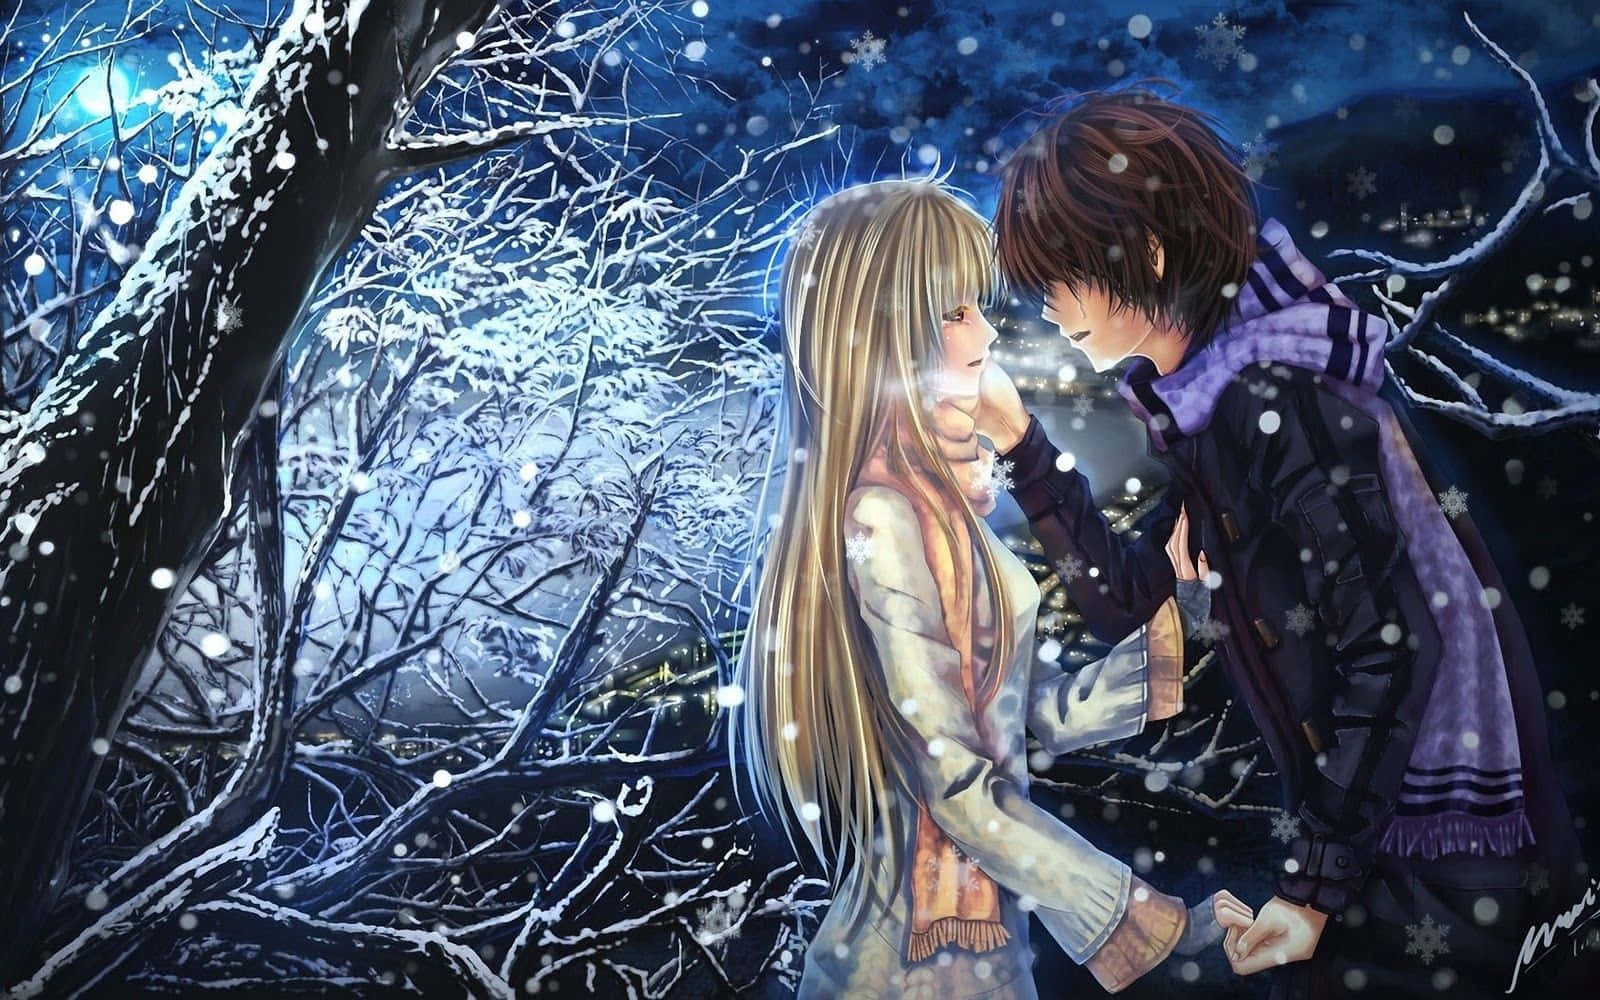 Hot Anime Couple Winter Forest Wallpaper